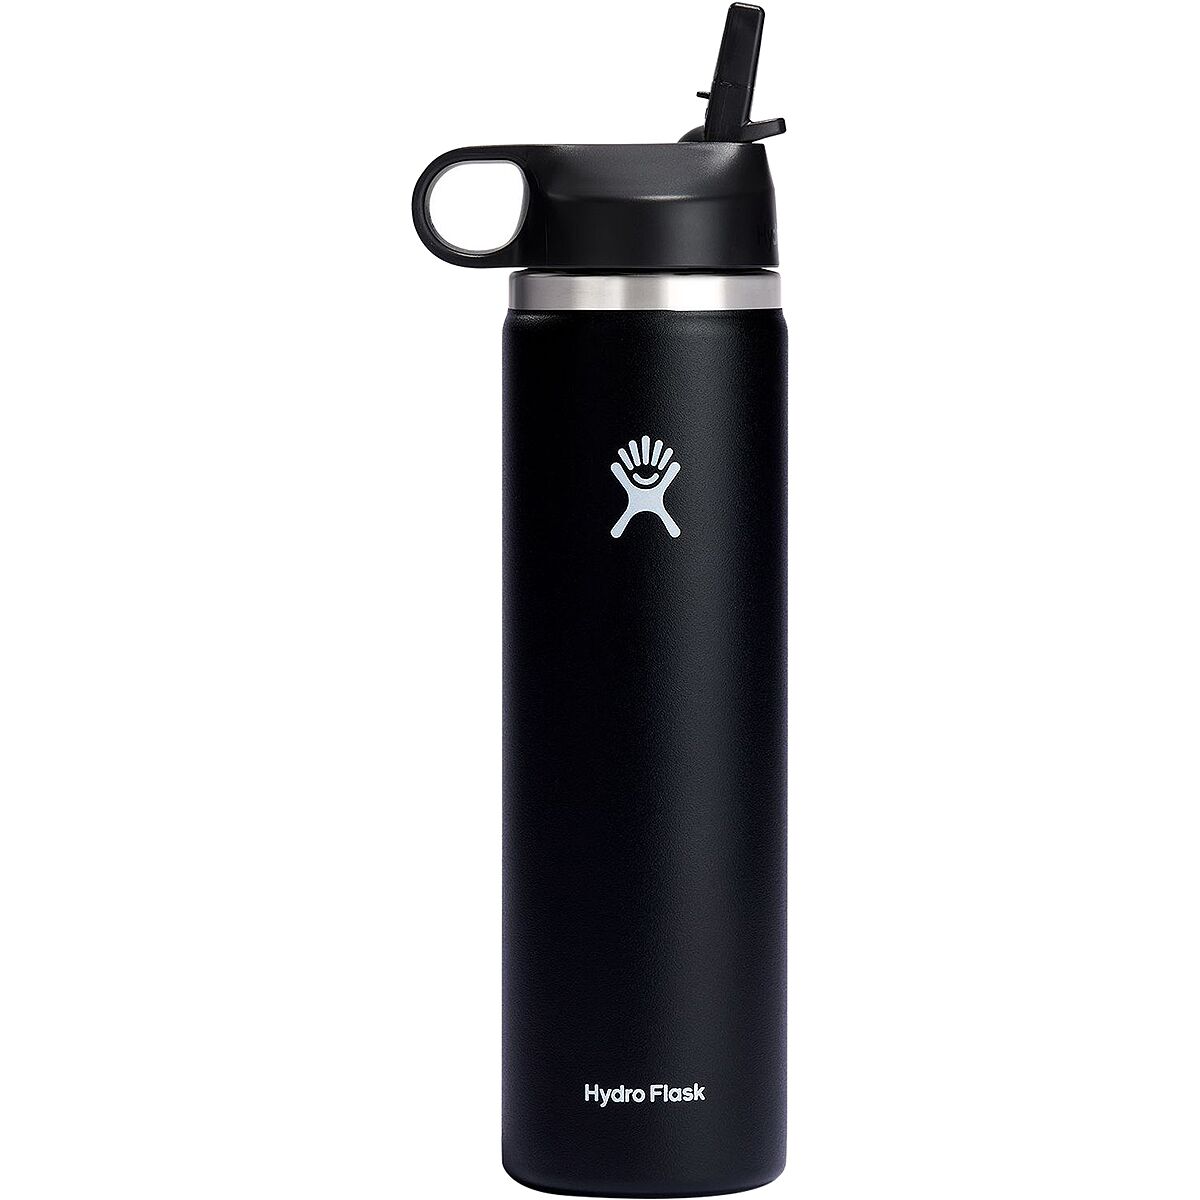 H2-Go! Hydro Flask water bottles are up to 50% off for Black